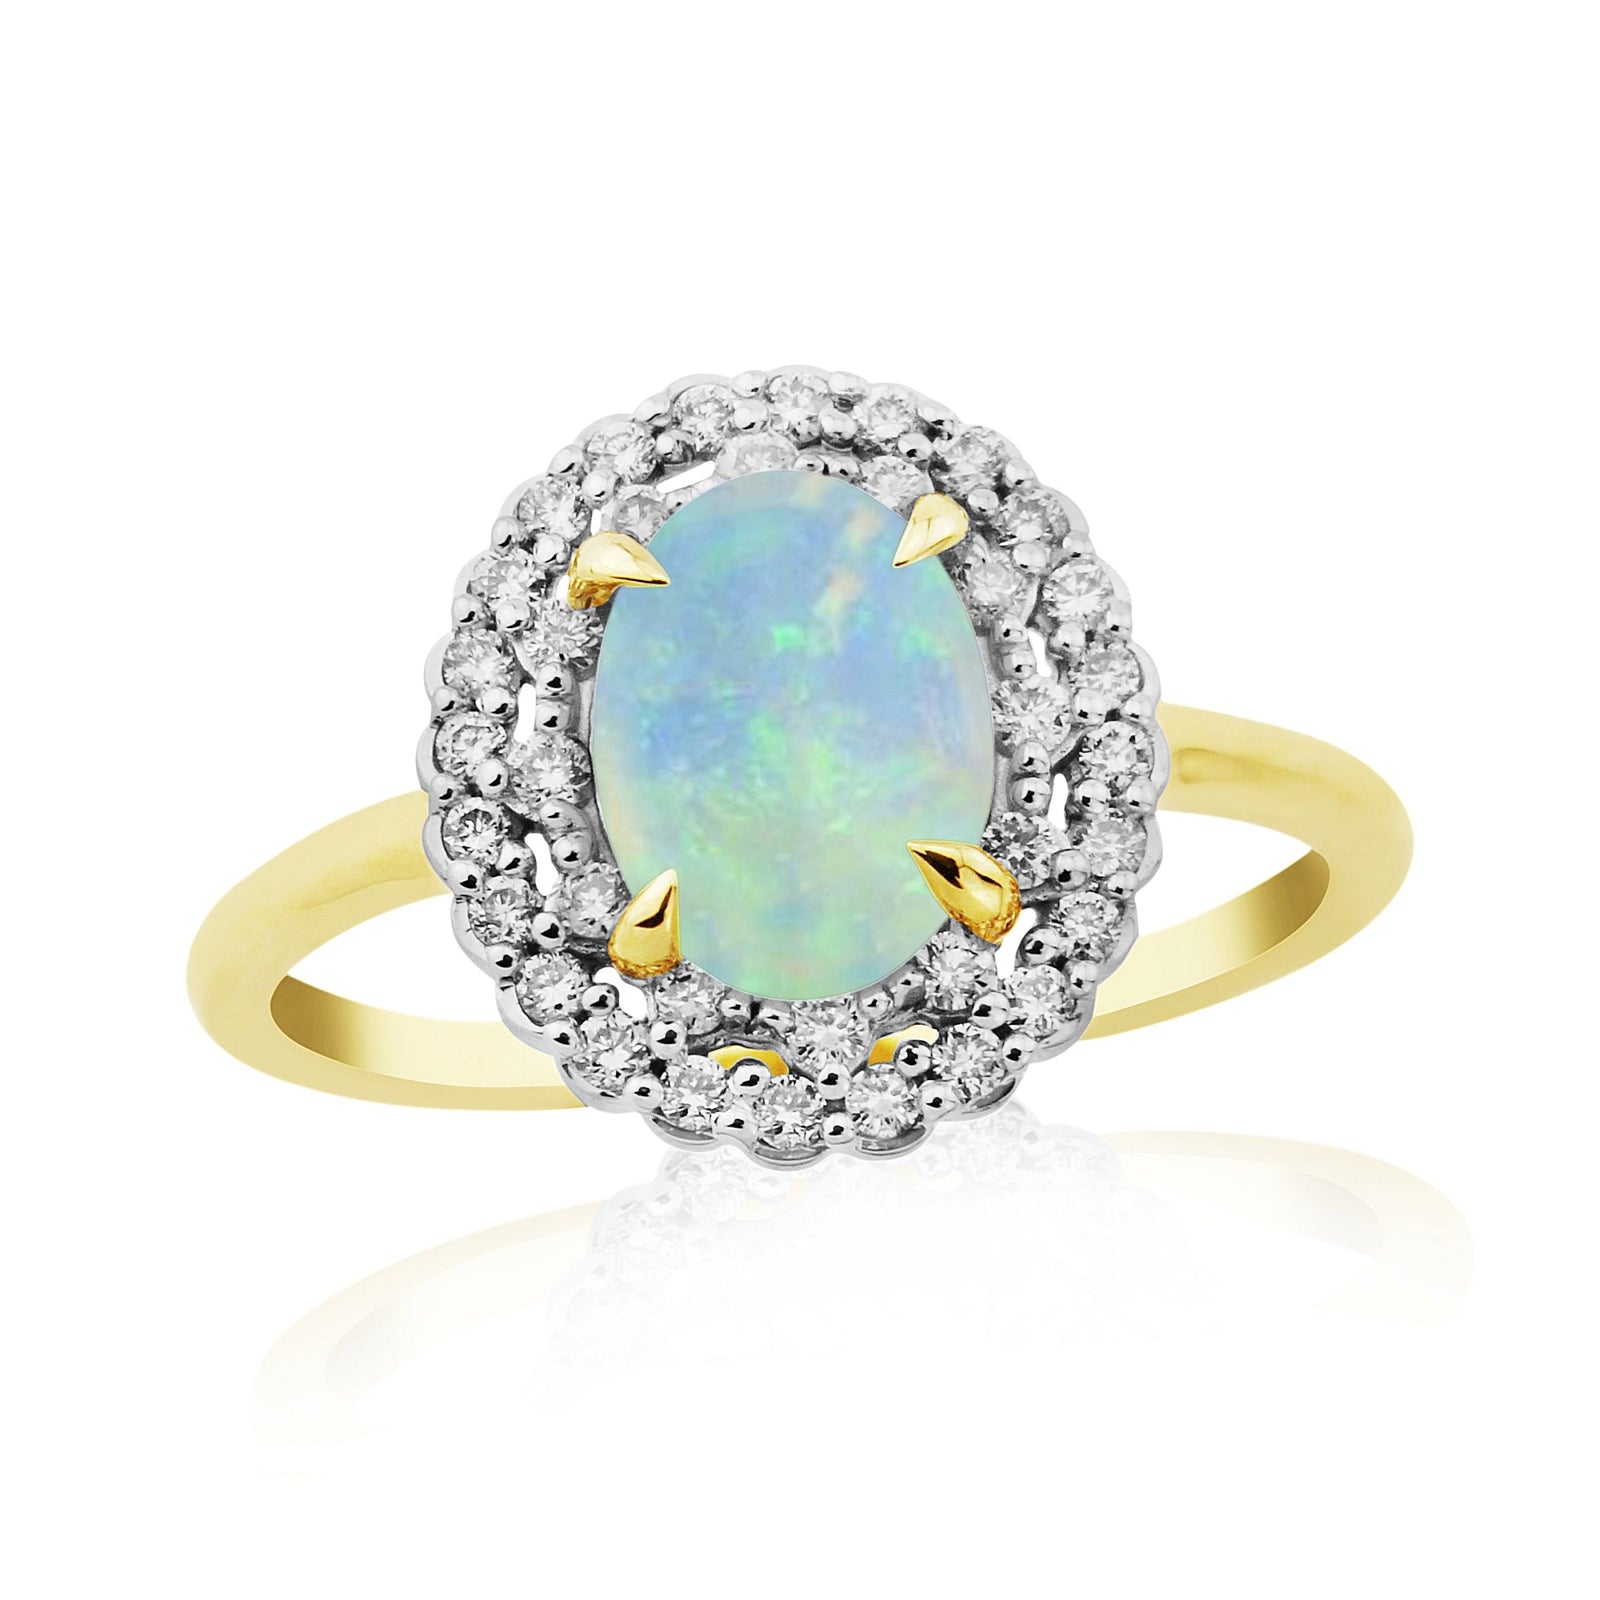 9ct gold 8x6mm oval opal & two row diamond cluster ring 0.24ct